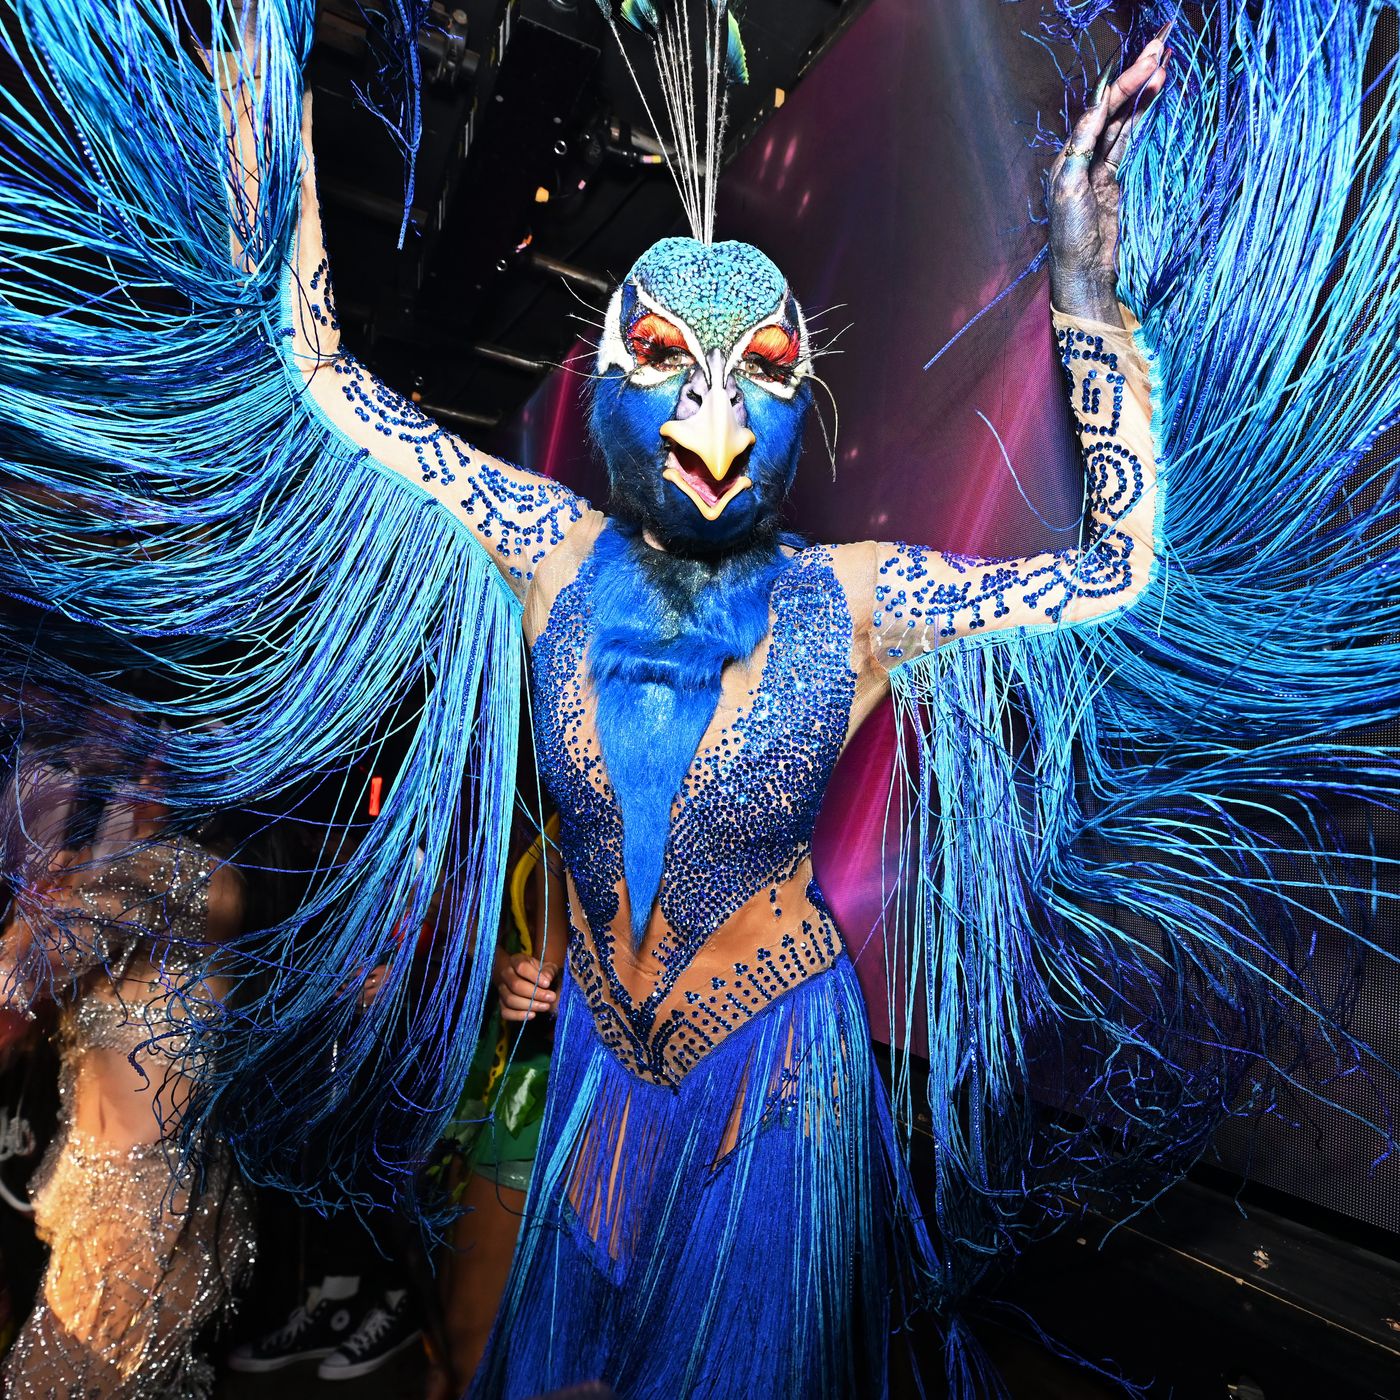 Peacock Suit for Men | Peacock costume, Peacock, Cool costumes